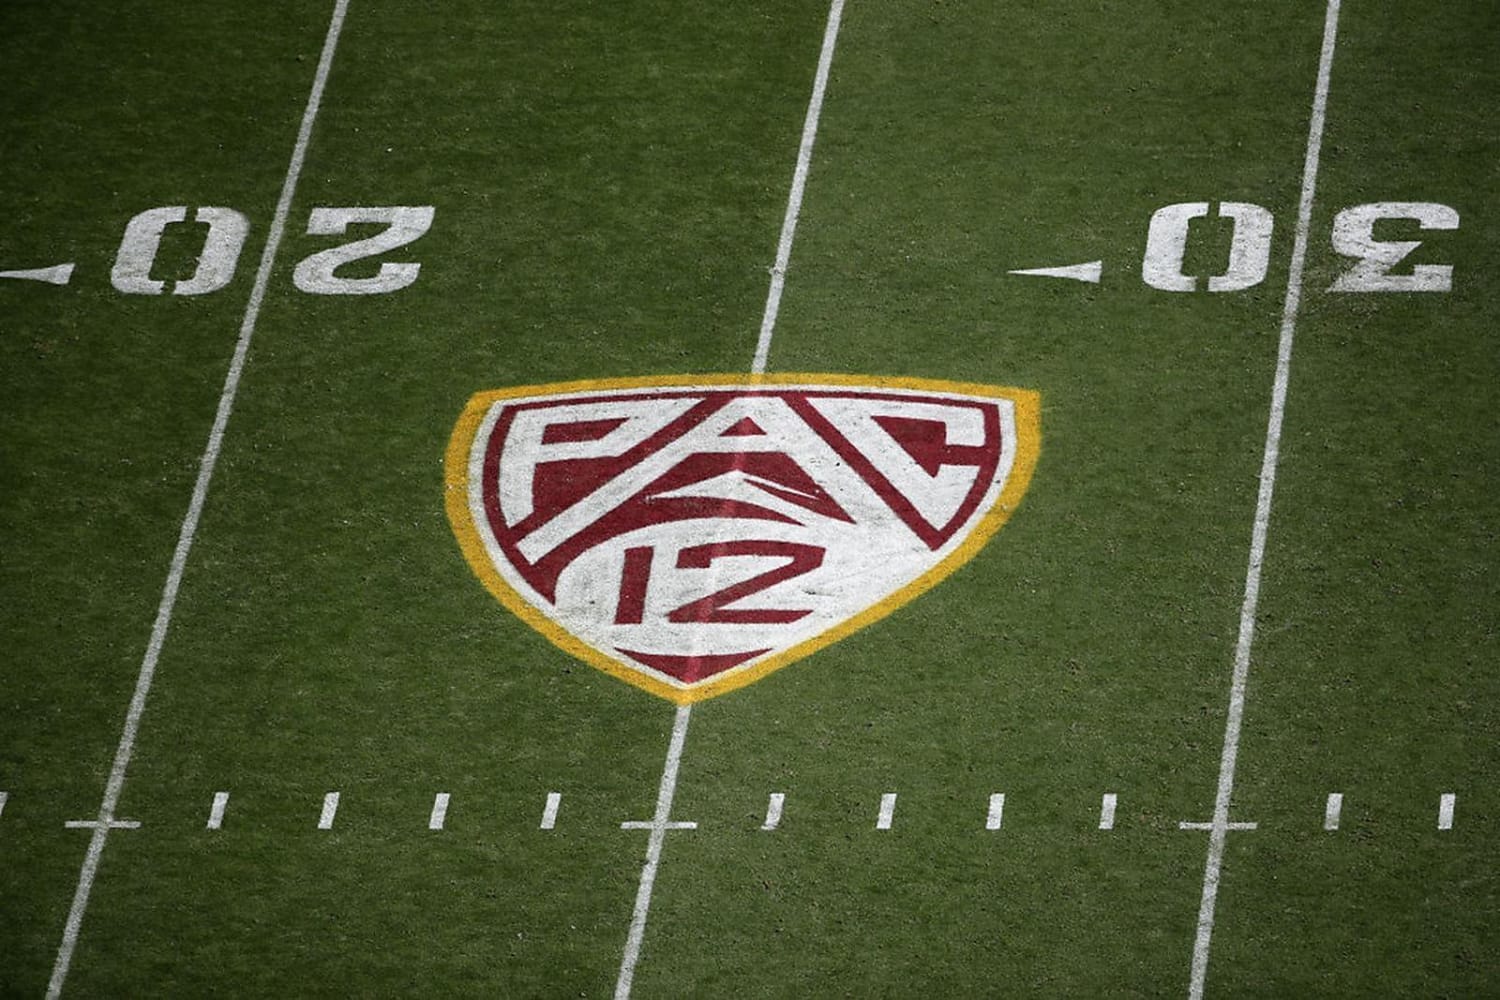 Opinion: The Pac-12's return to sports plan is a sham